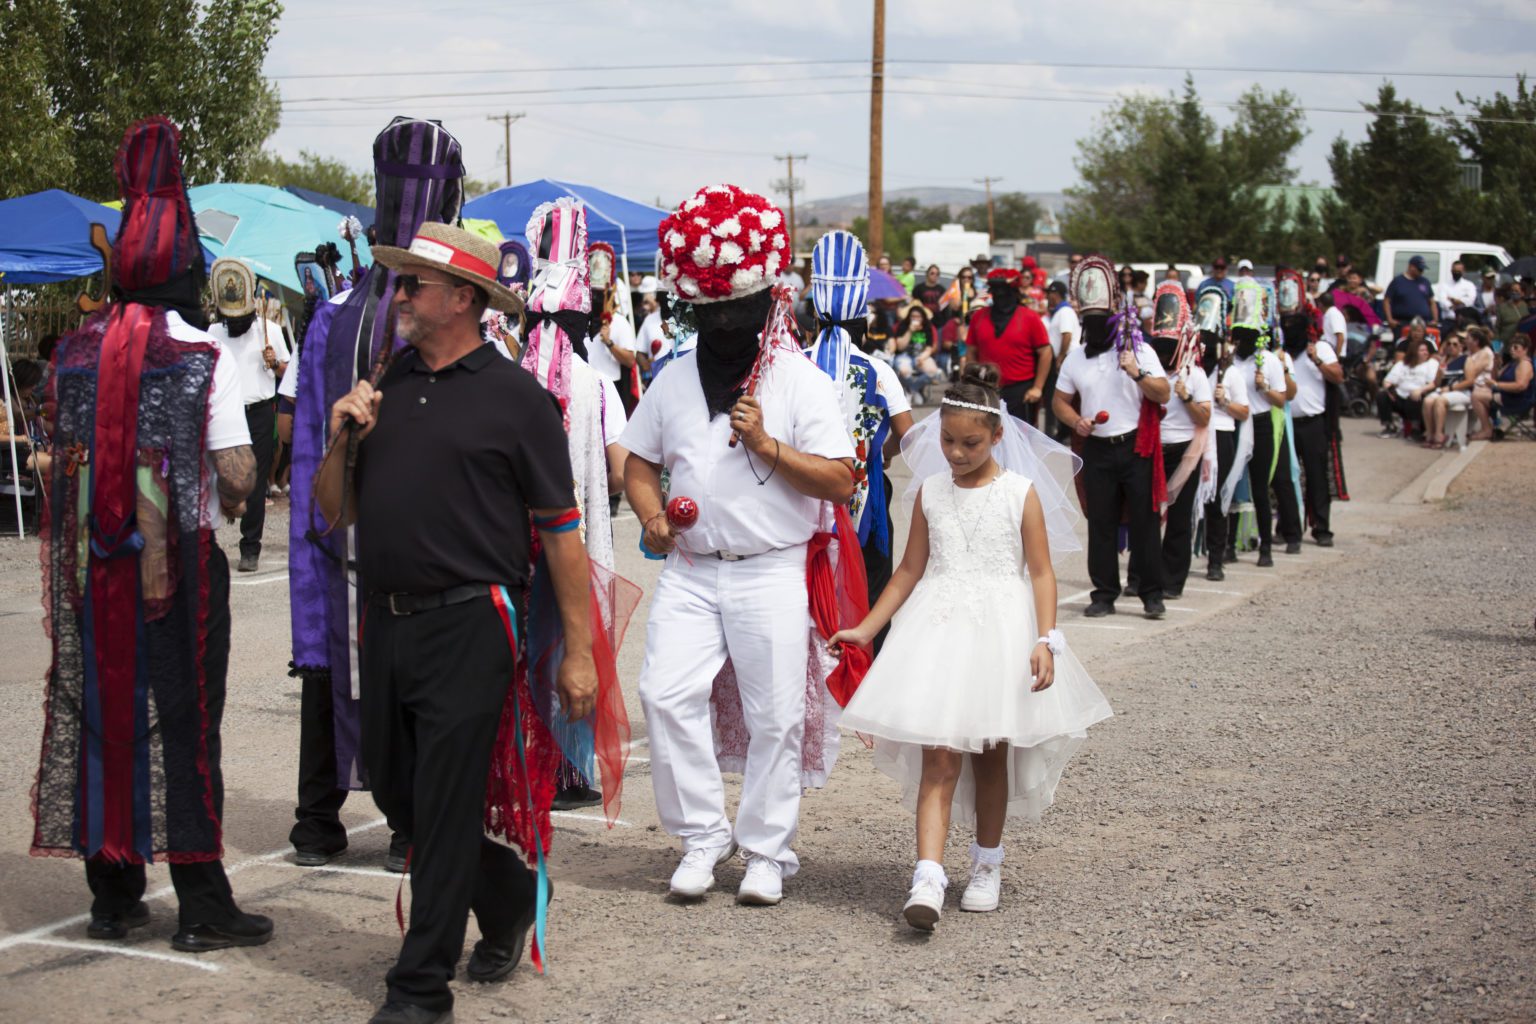 A Long Standing Tradition in the Town of Bernalillo Continues